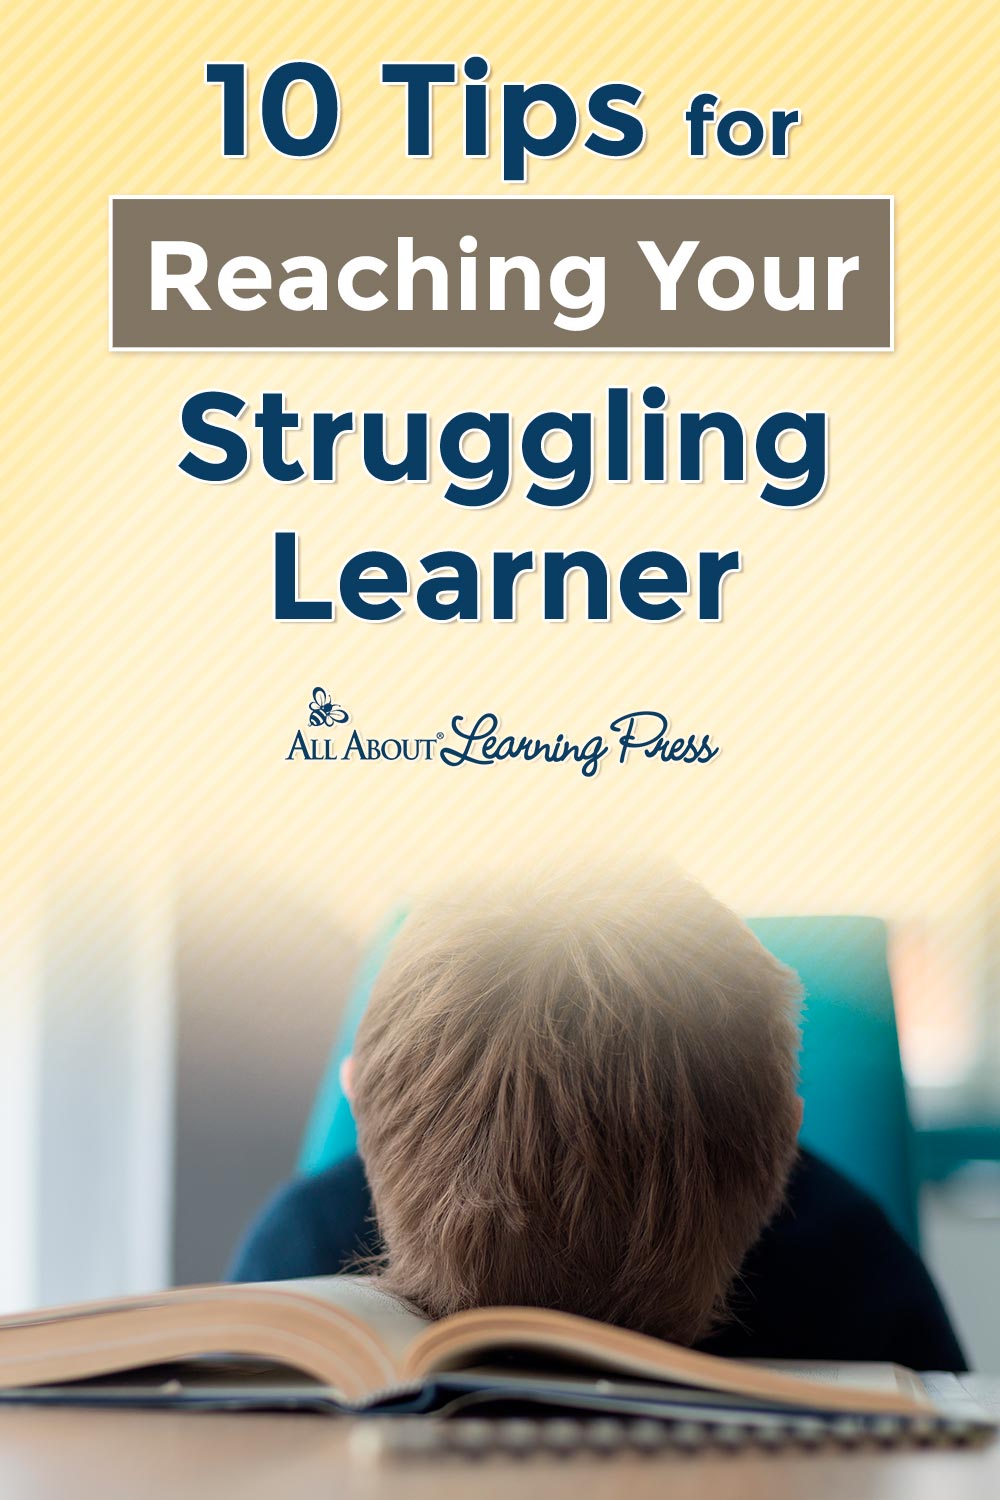 18 Tips for Reaching Your Struggling Learner